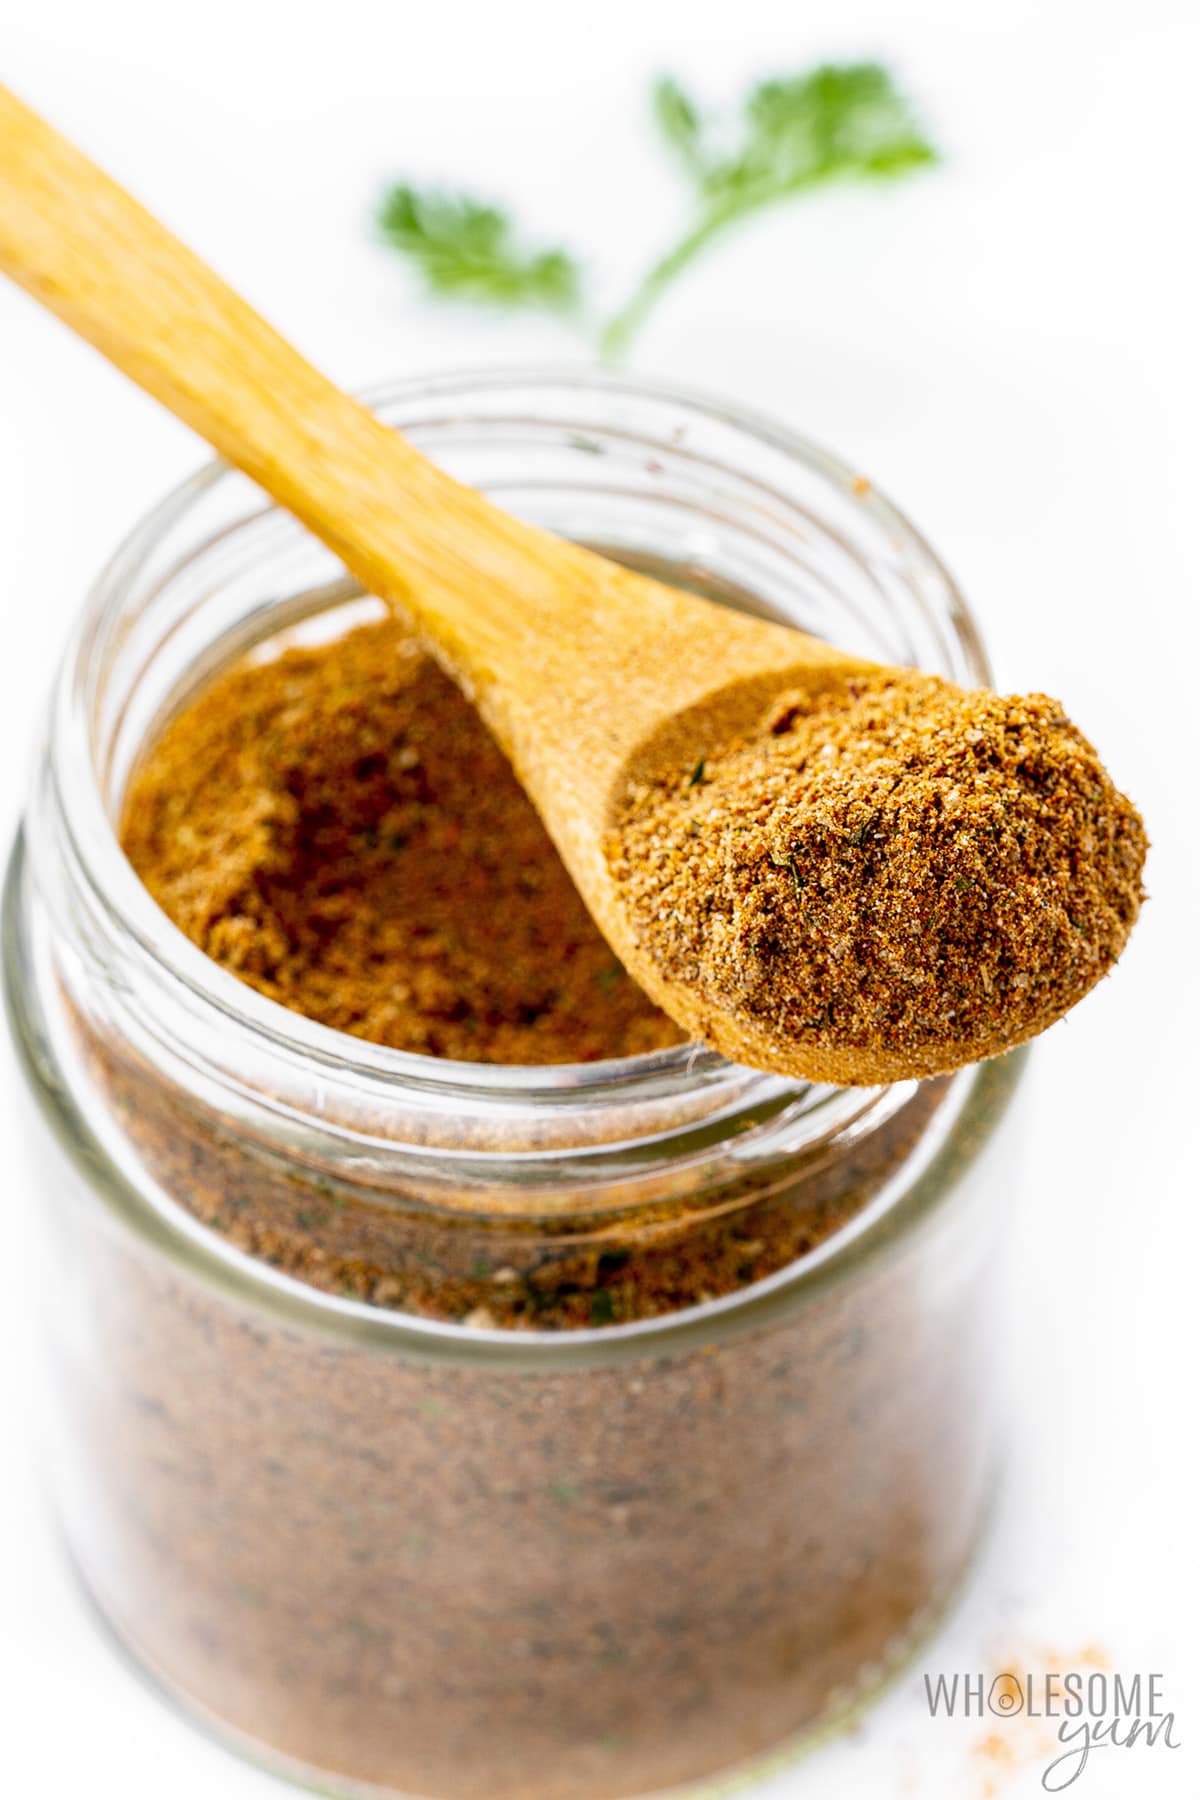 Jerk seasoning in a jar and on a wooden spoon.